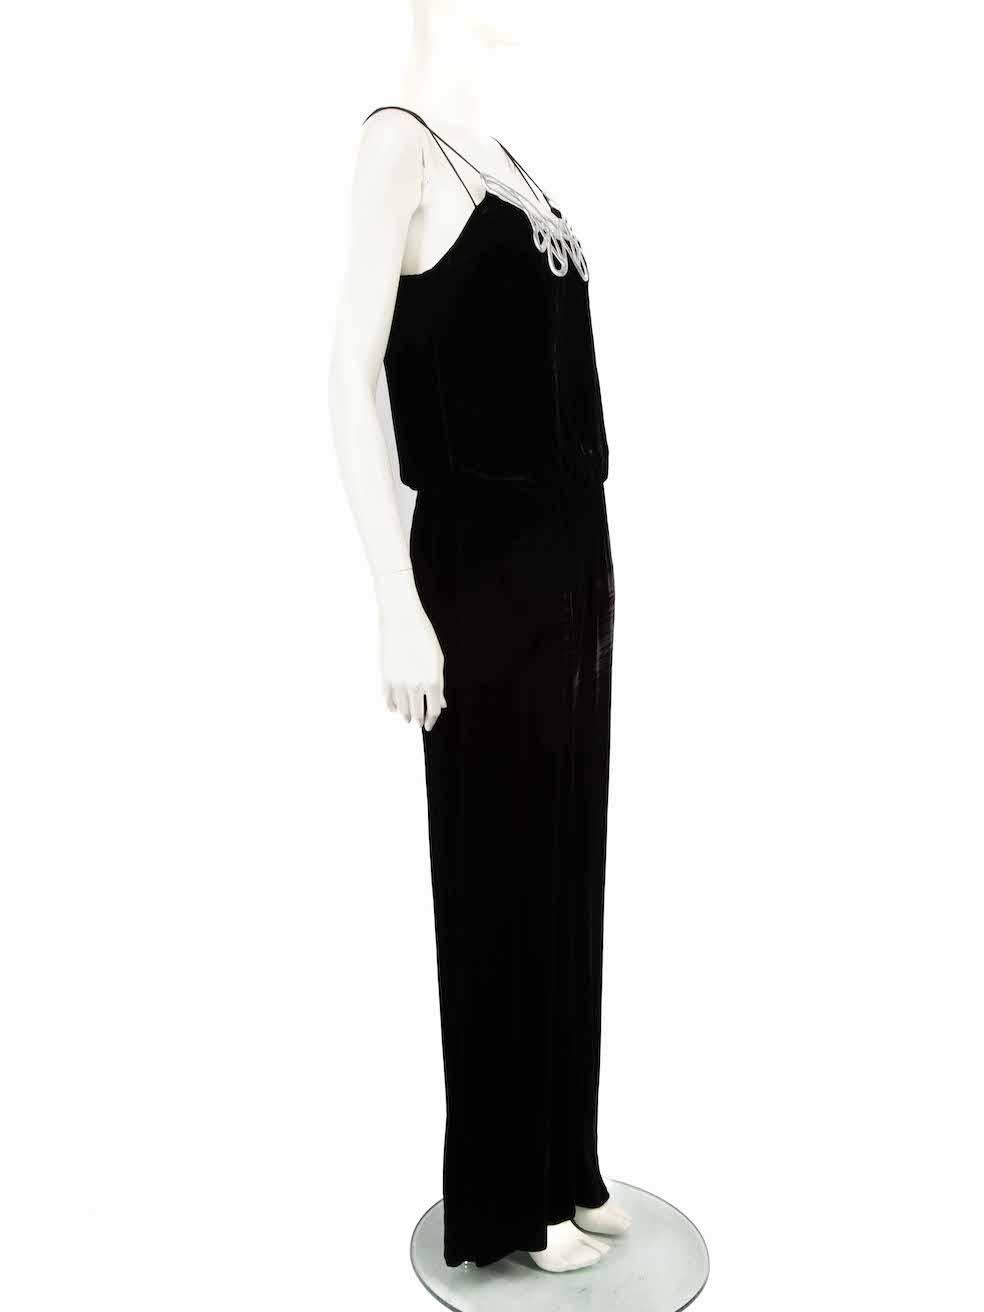 CONDITION is Very good. Hardly any visible wear to jumpsuit is evident on this used Pinko designer resale item.
 
 
 
 Details
 
 
 Black
 
 Velvet
 
 Jumpsuit
 
 Sleeveless
 
 V neckline
 
 Silver butterfly detail
 
 Elasticated waistline
 
 Back